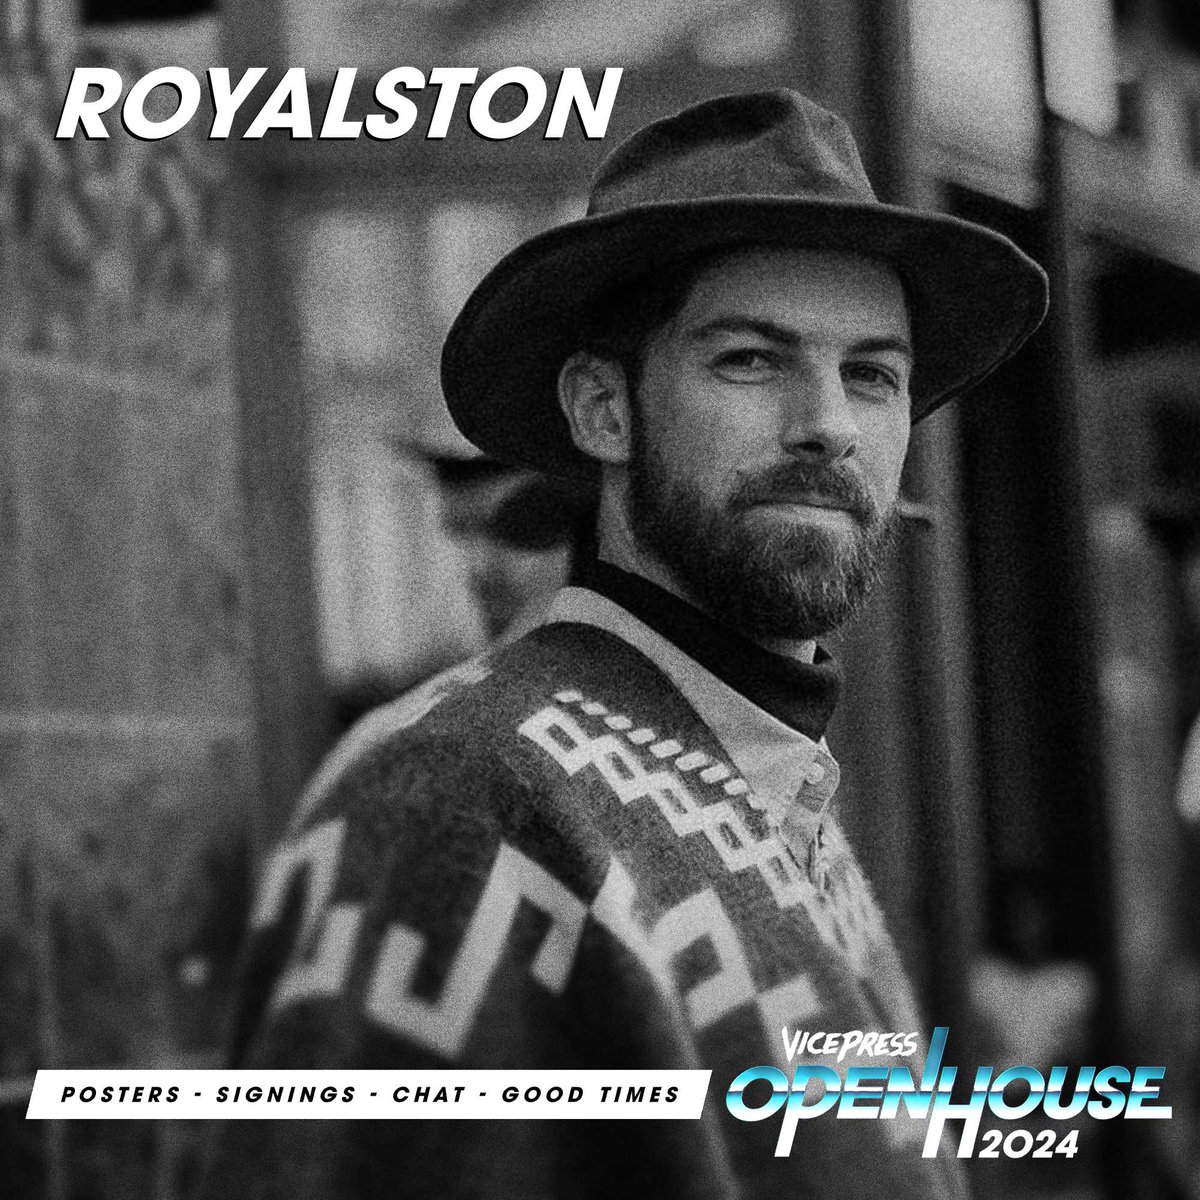 Open House 2024 announcement! @RoyalstonDesign will be back with us in Sheffield on June 8th at The Steamworks for our very own poster convention! Tickets are available at VicePressOpenHouse.co.uk